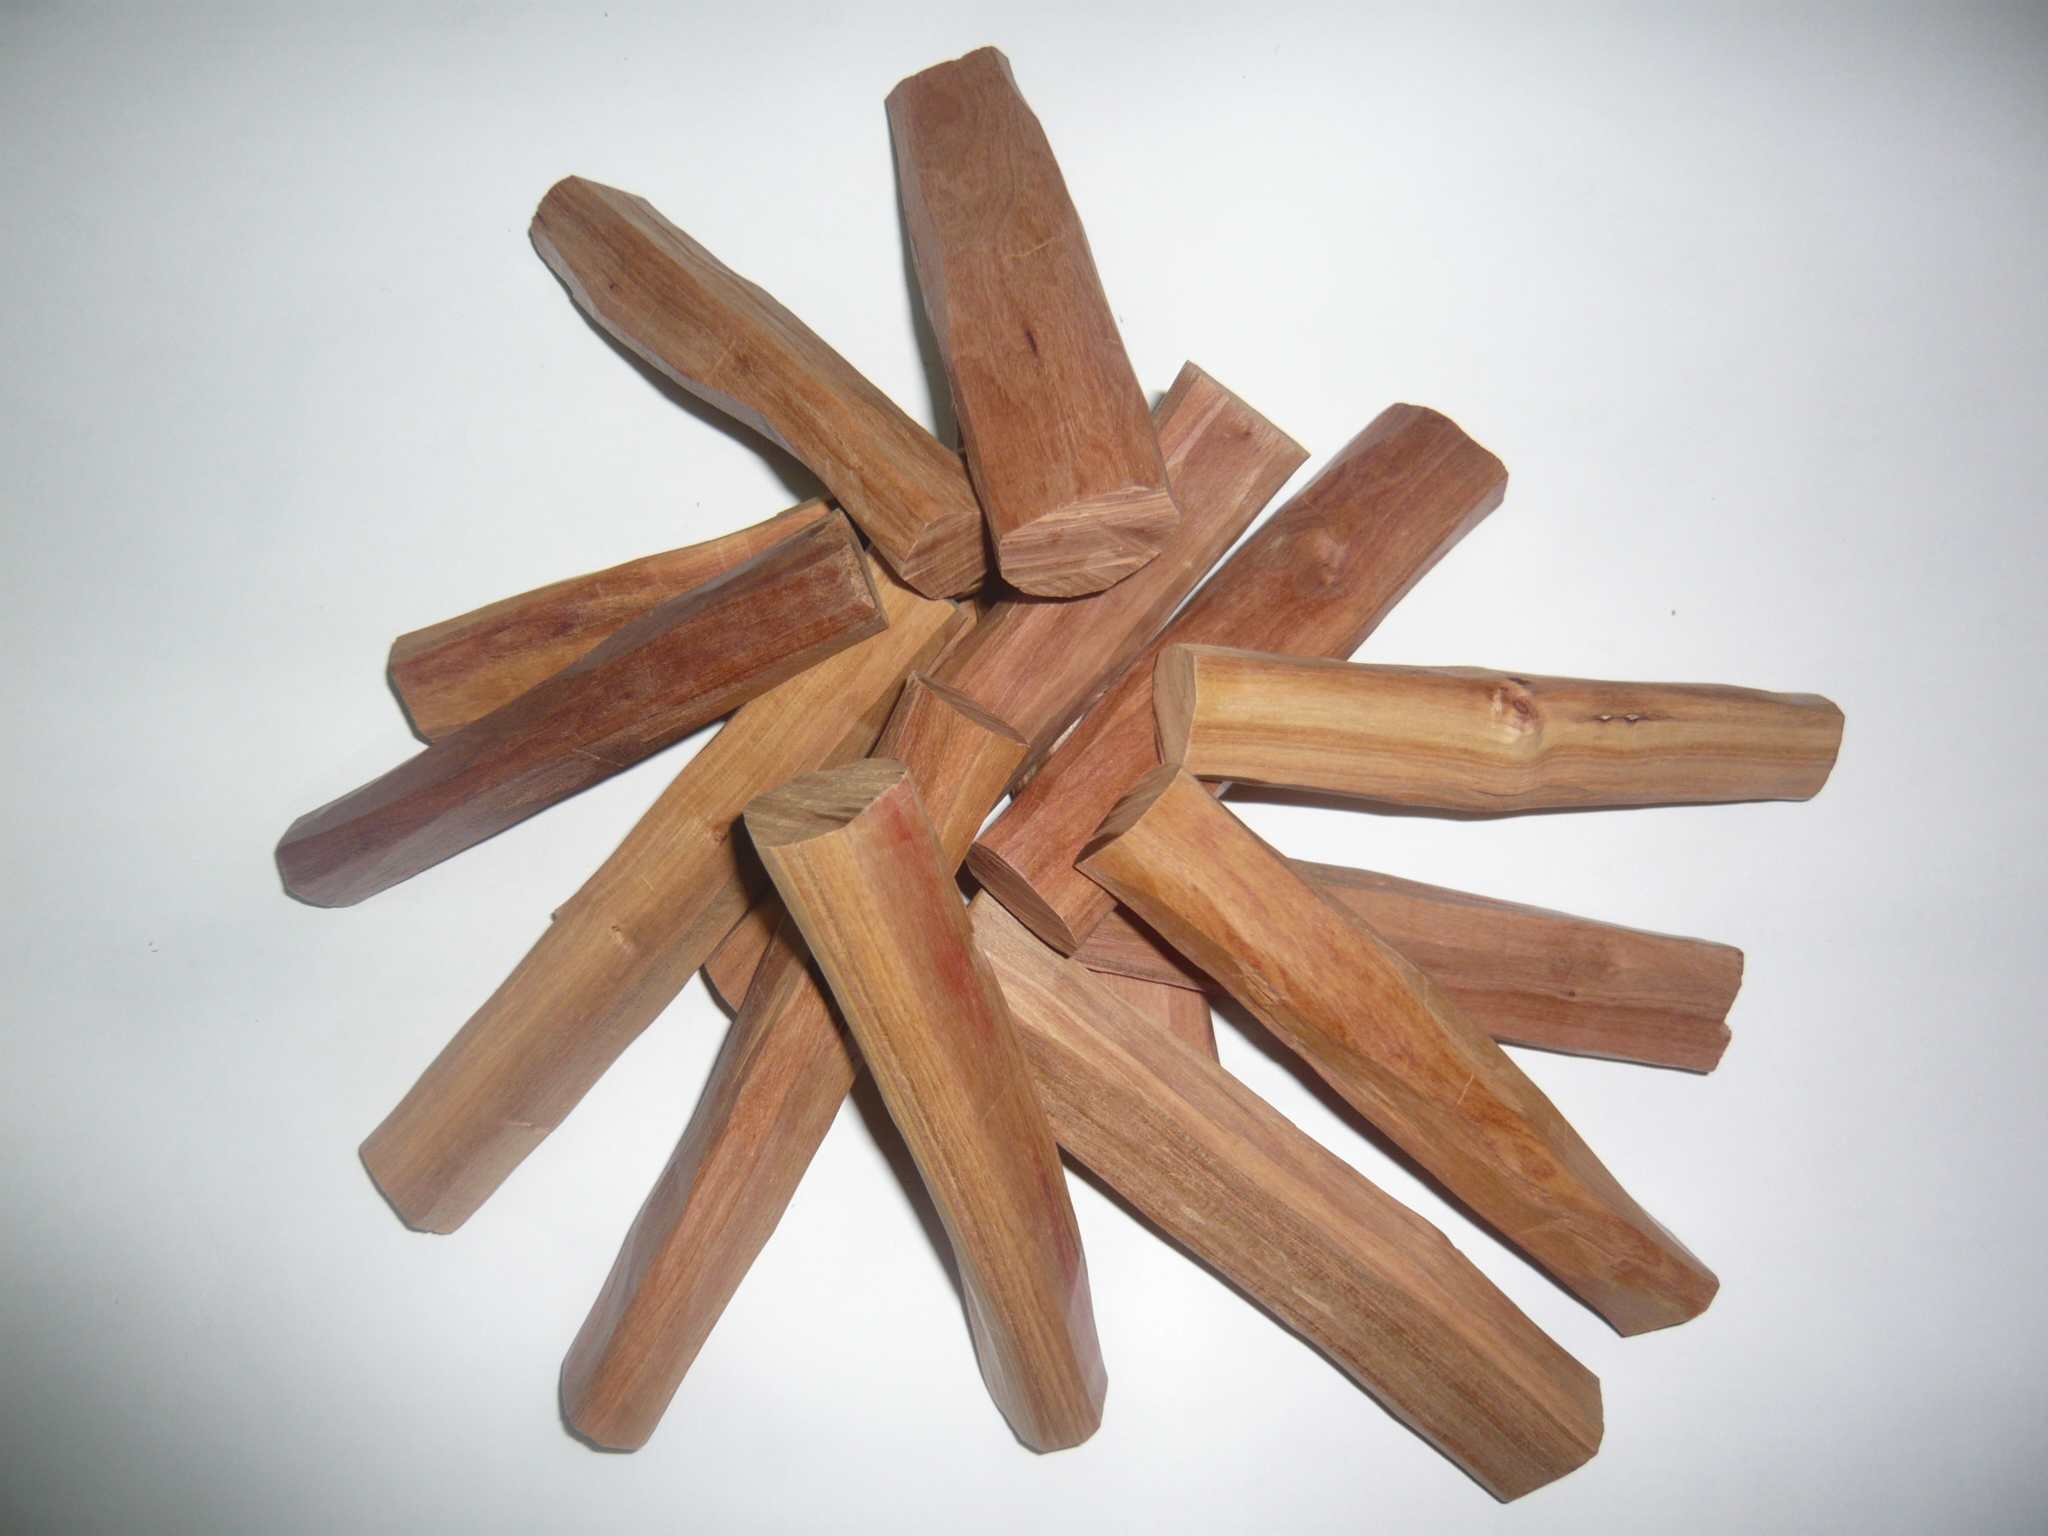 Sandalwood and rosewater is a great home remedy for acne scars